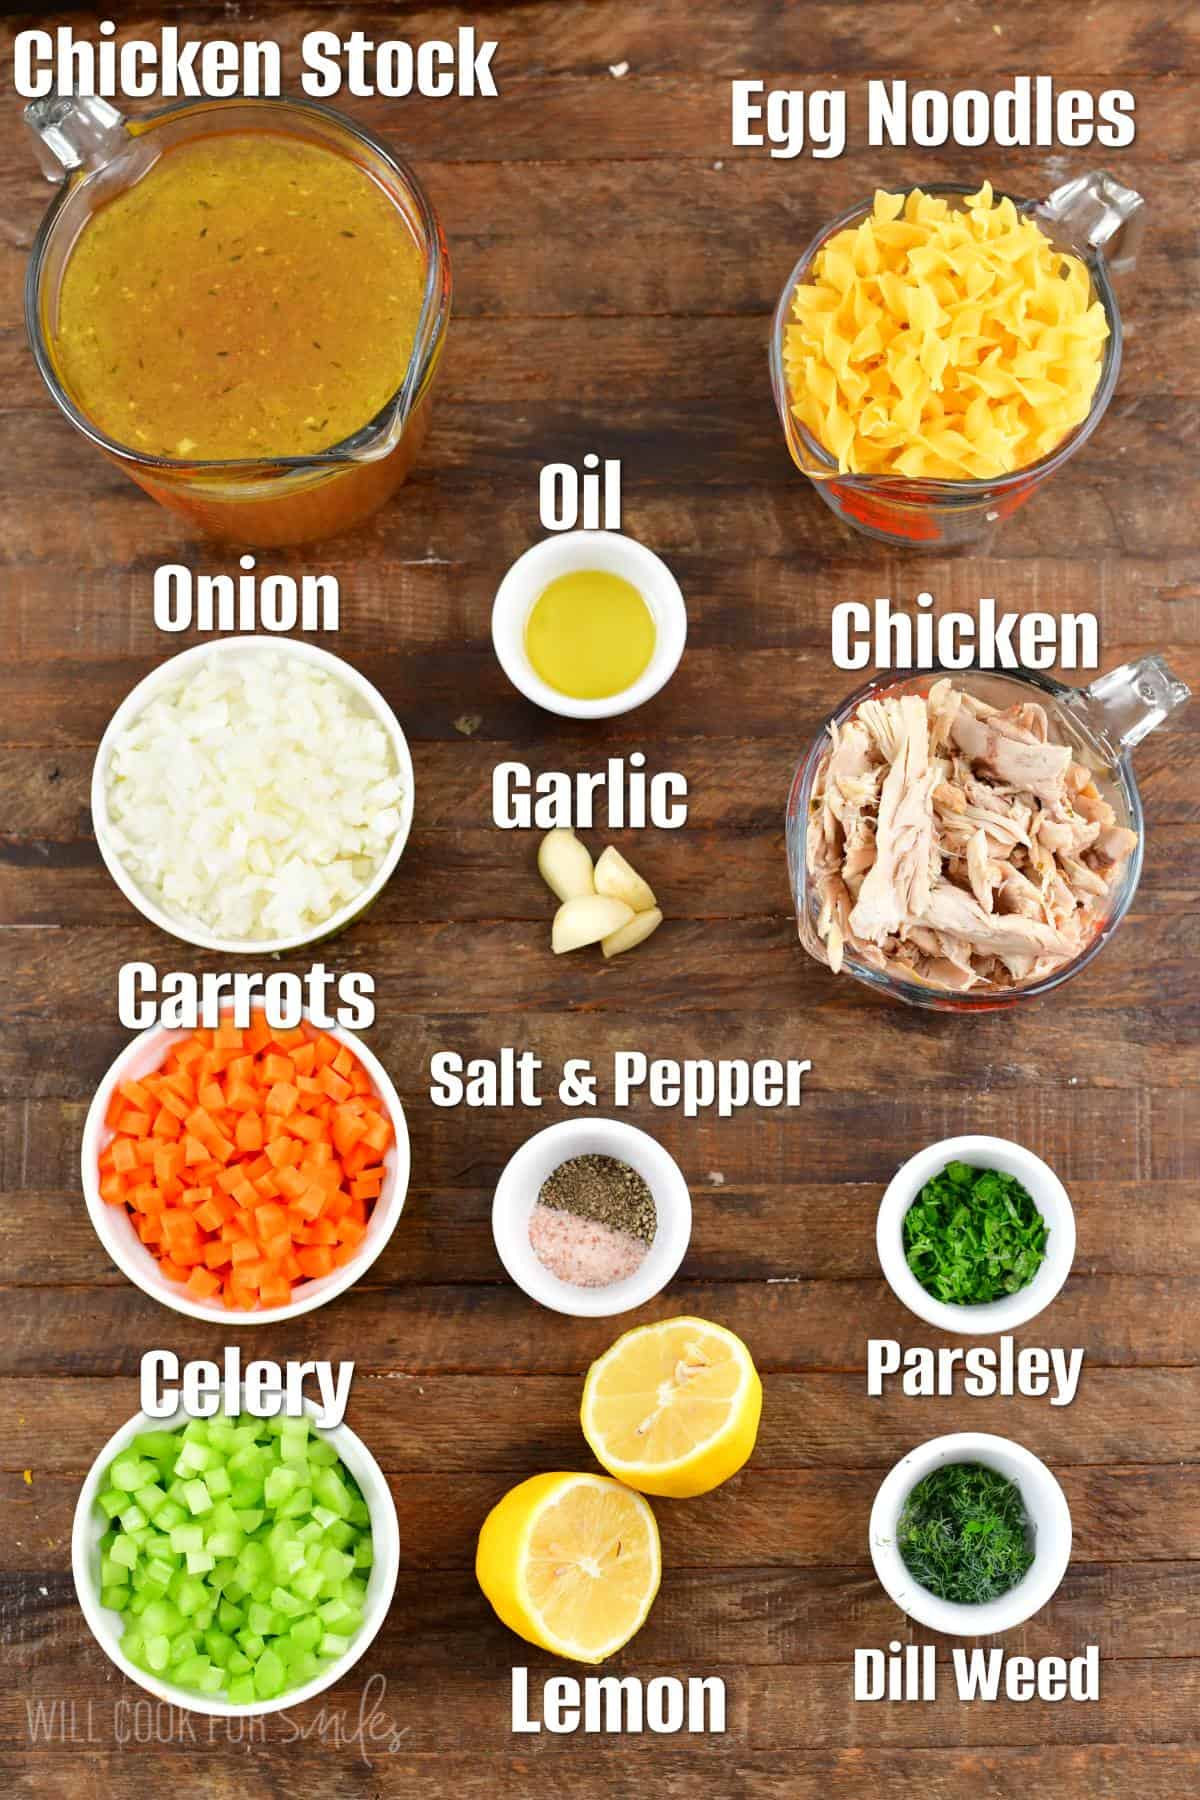 Labeled ingredients for chicken noodle soup on a wood surface.